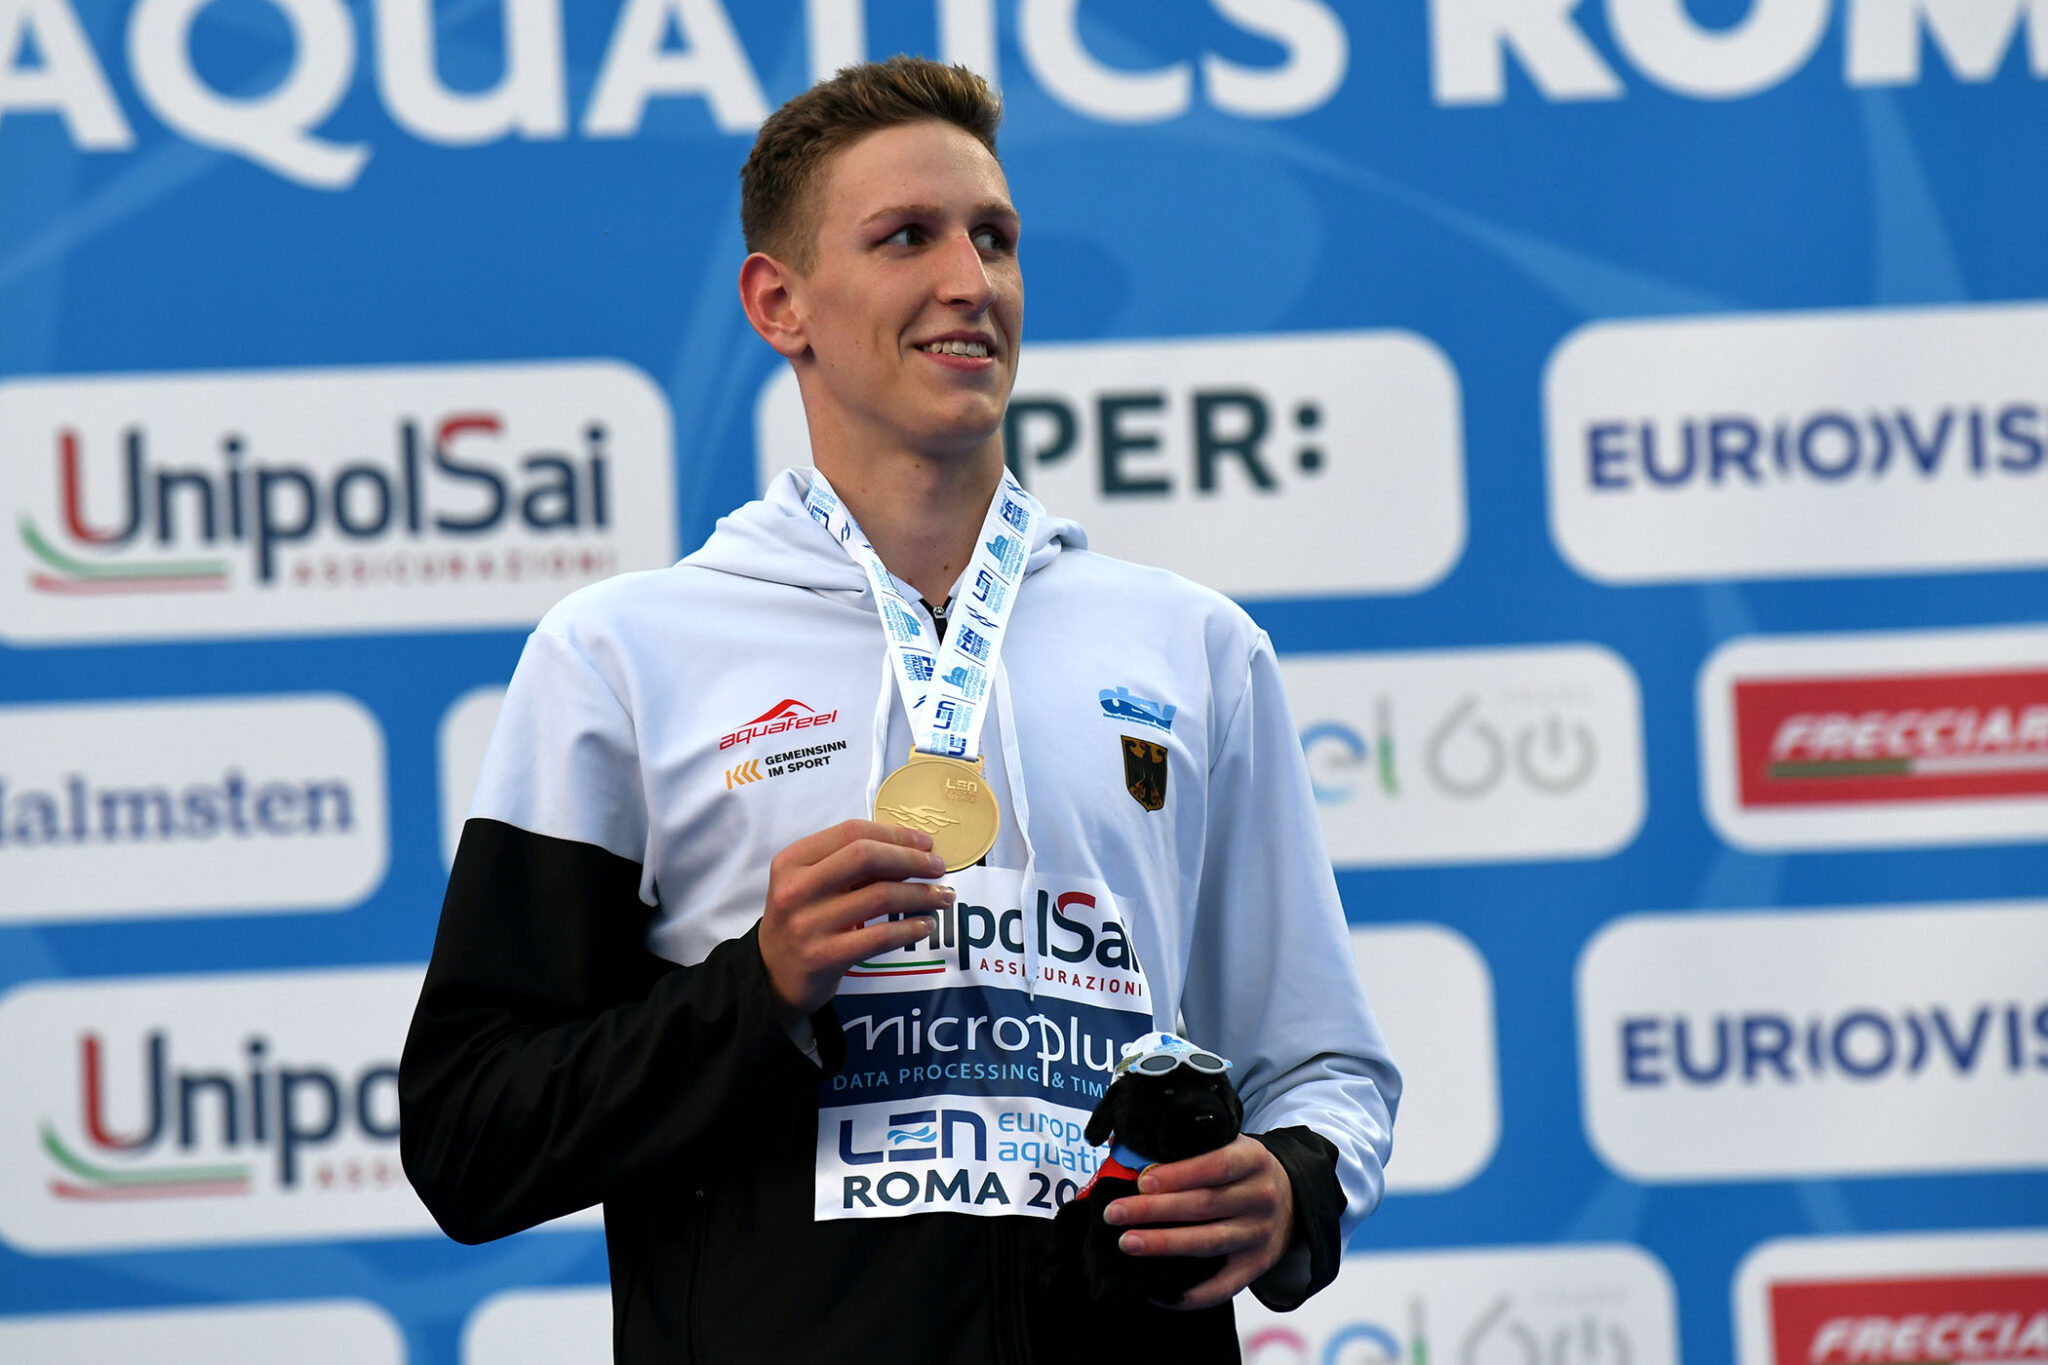 Lukas Maertens Sets World Record with 3:40.33 in 400 Freestyle at German Championships